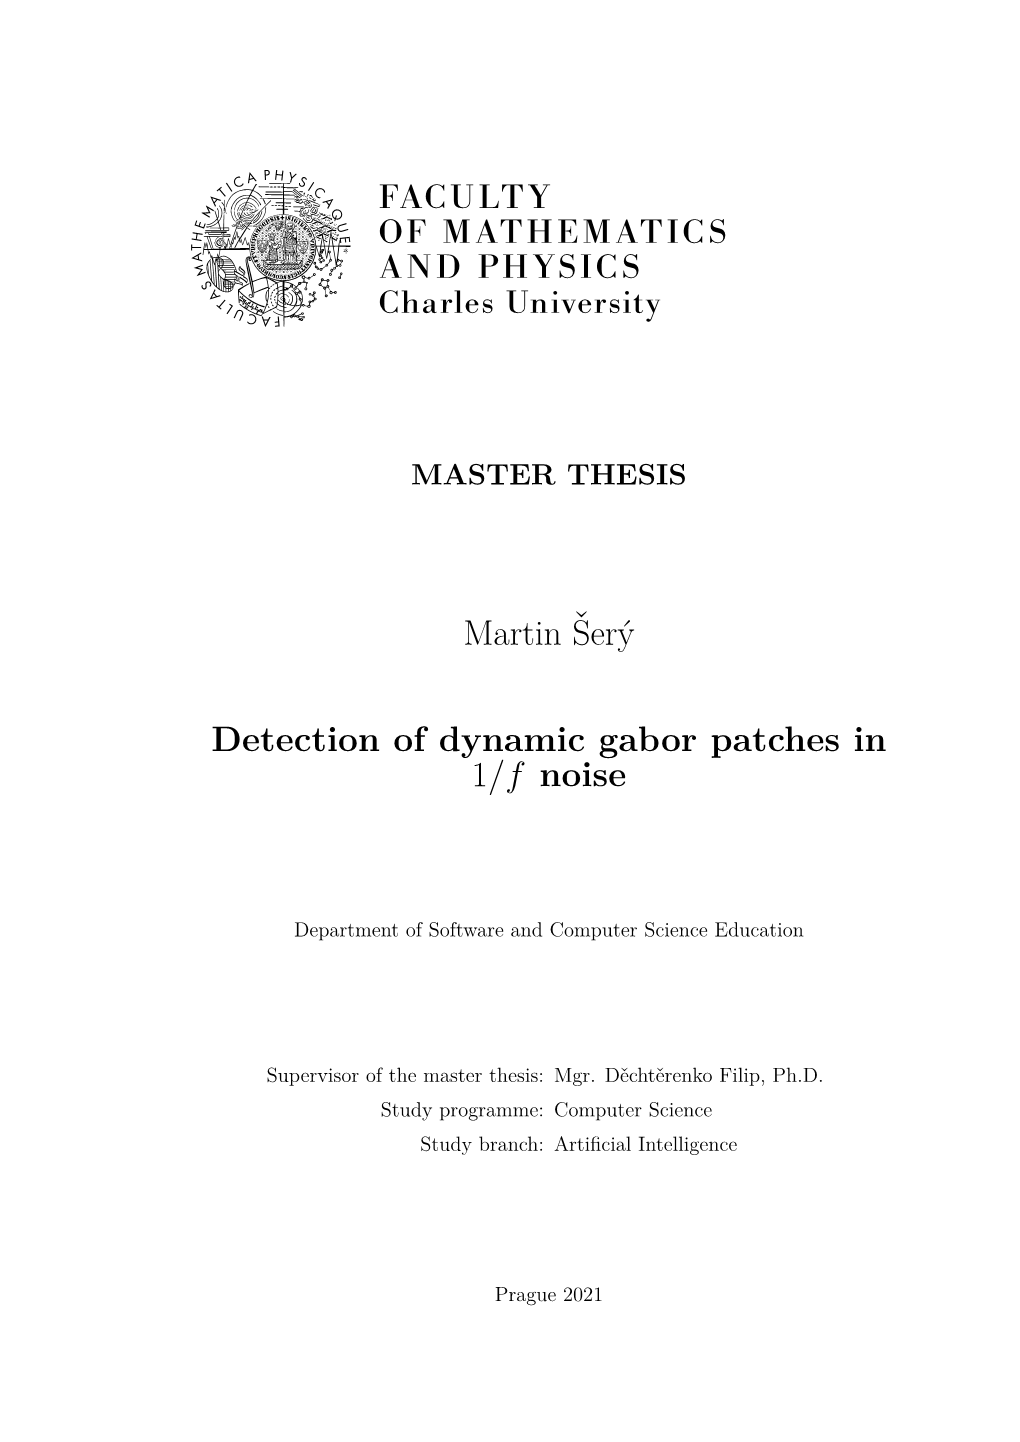 Detection of Dynamic Gabor Patches in 1/F Noise